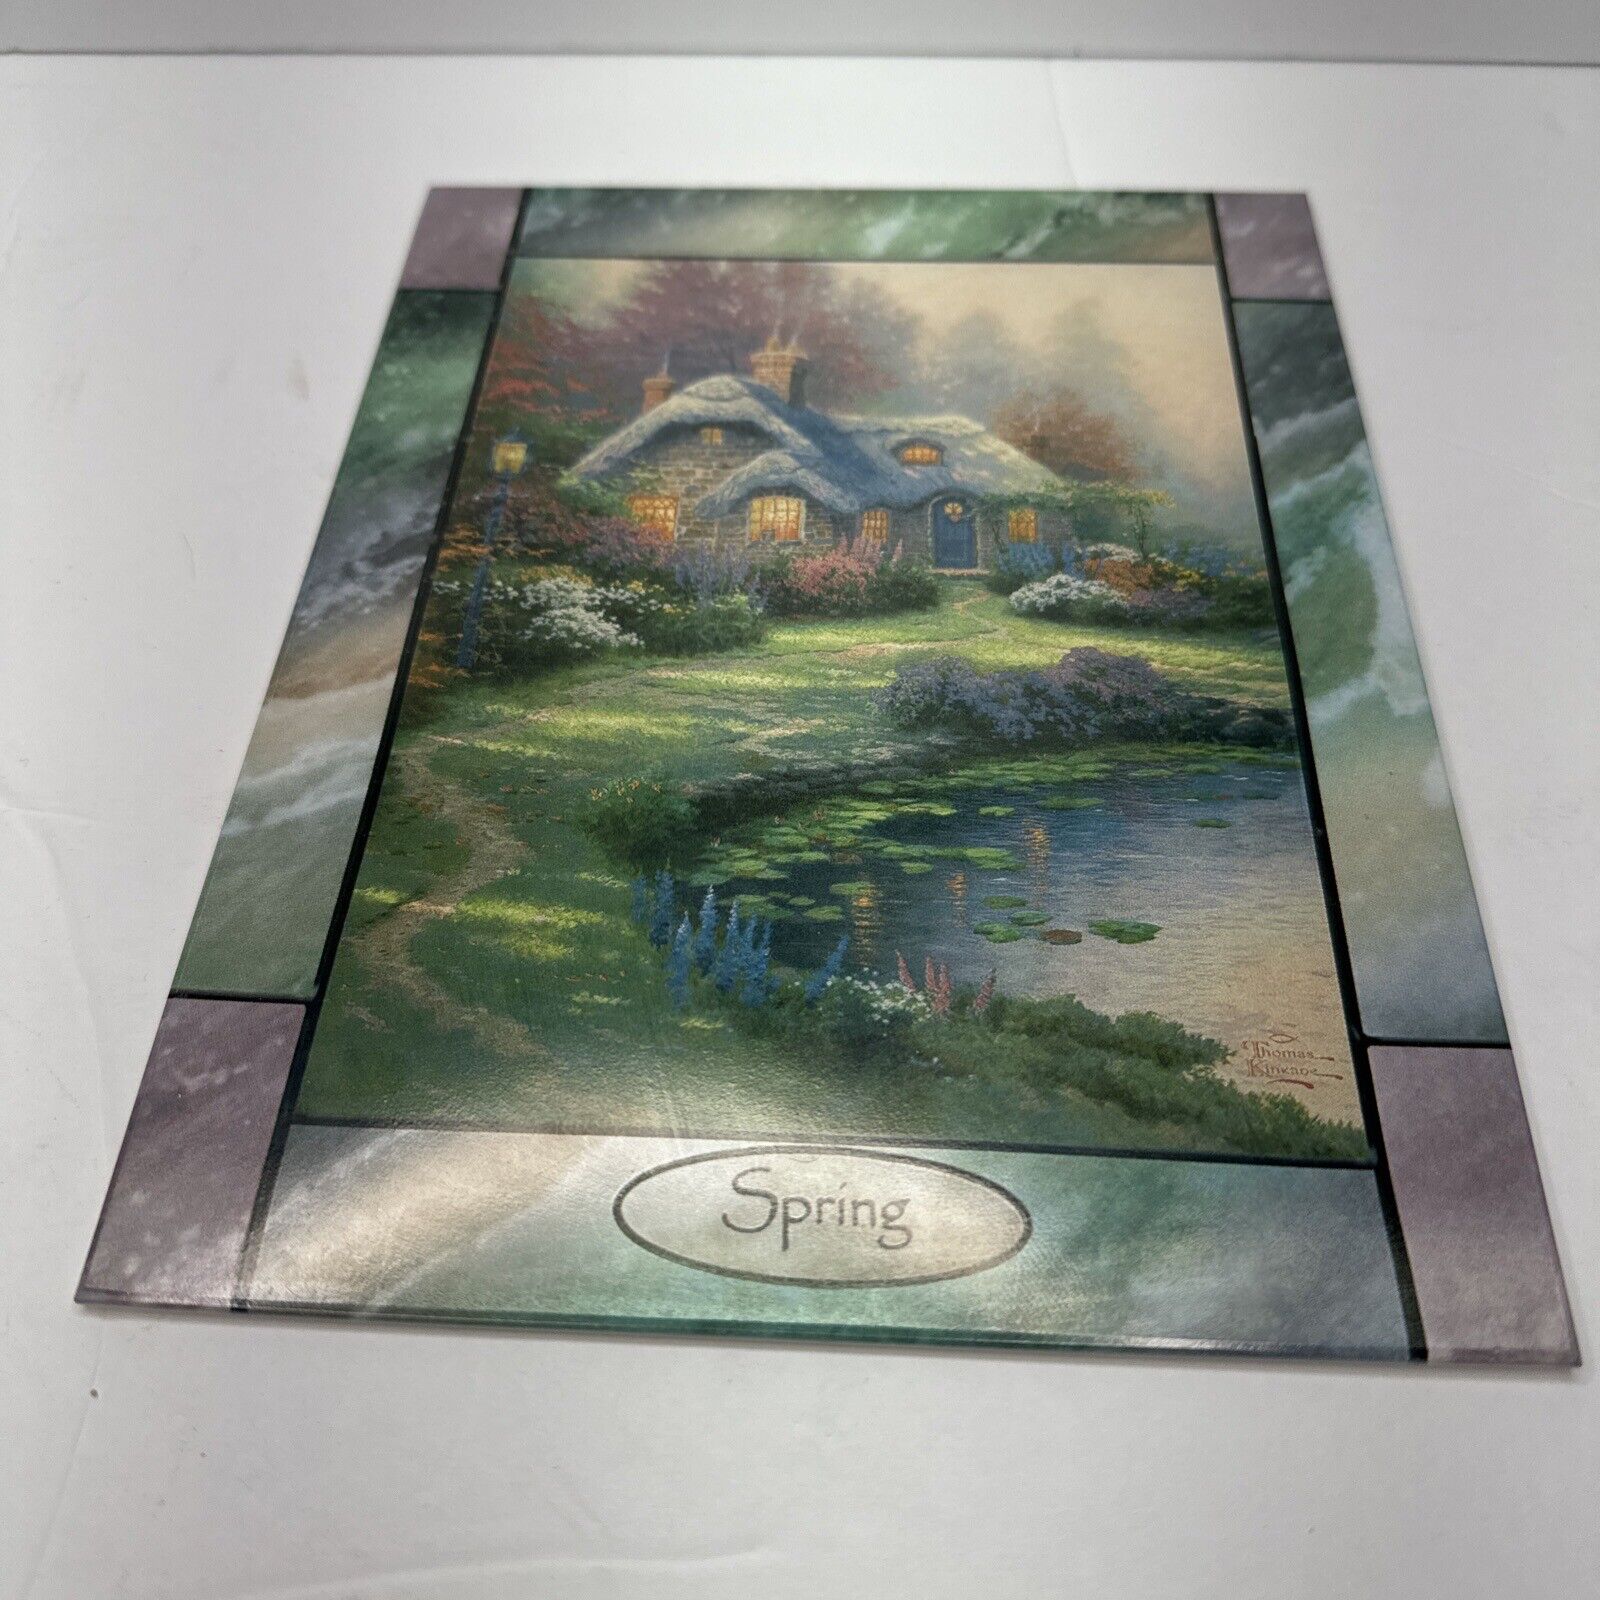 Thomas Kinkade Lighted Stained-Glass Clock Collection Panel Spring